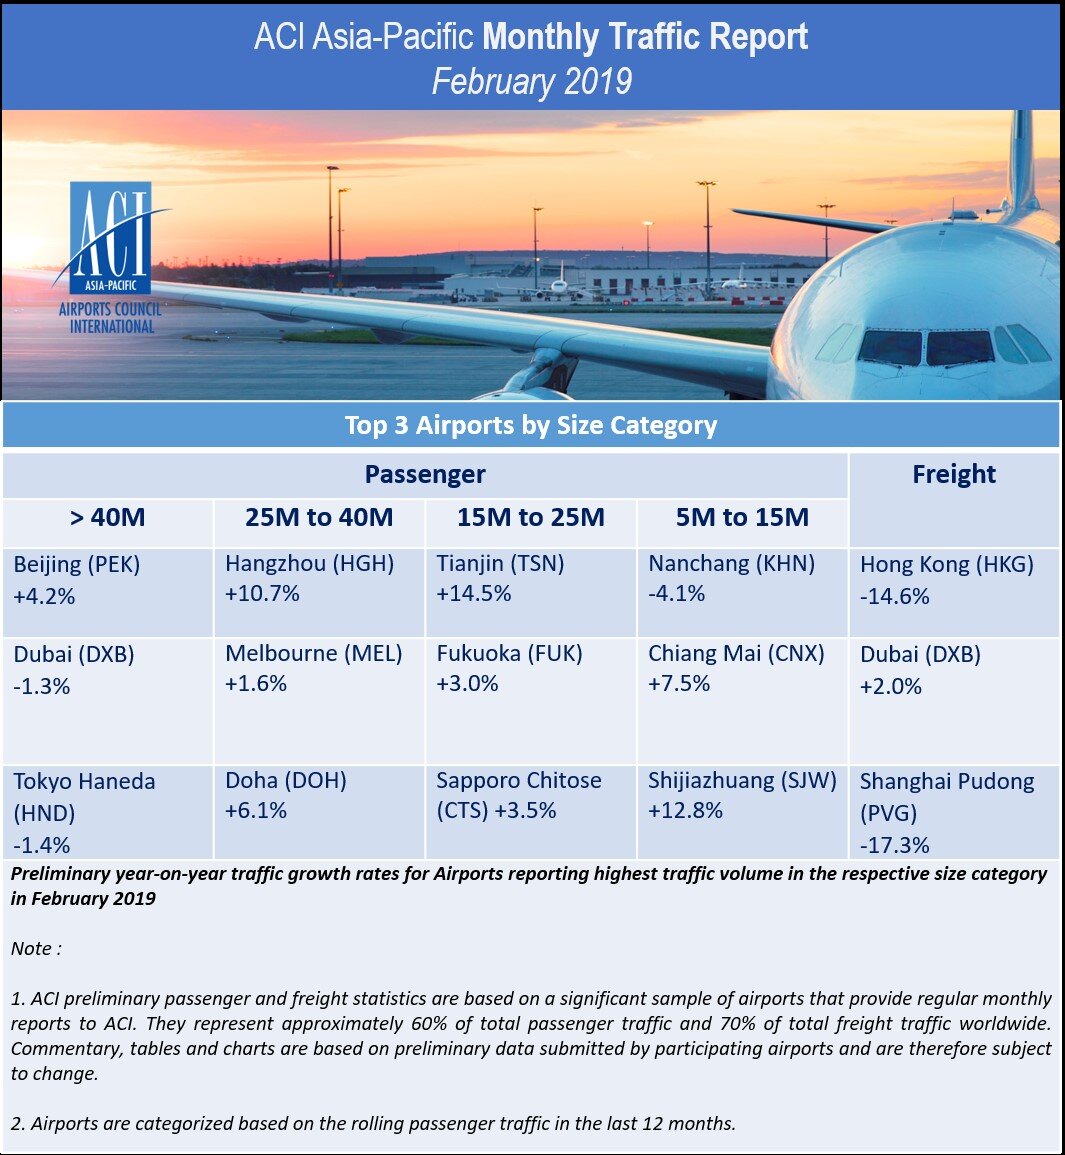 February 2019: Passengers up 2.7% in Asia-Pacific and 2.5% in Middle East